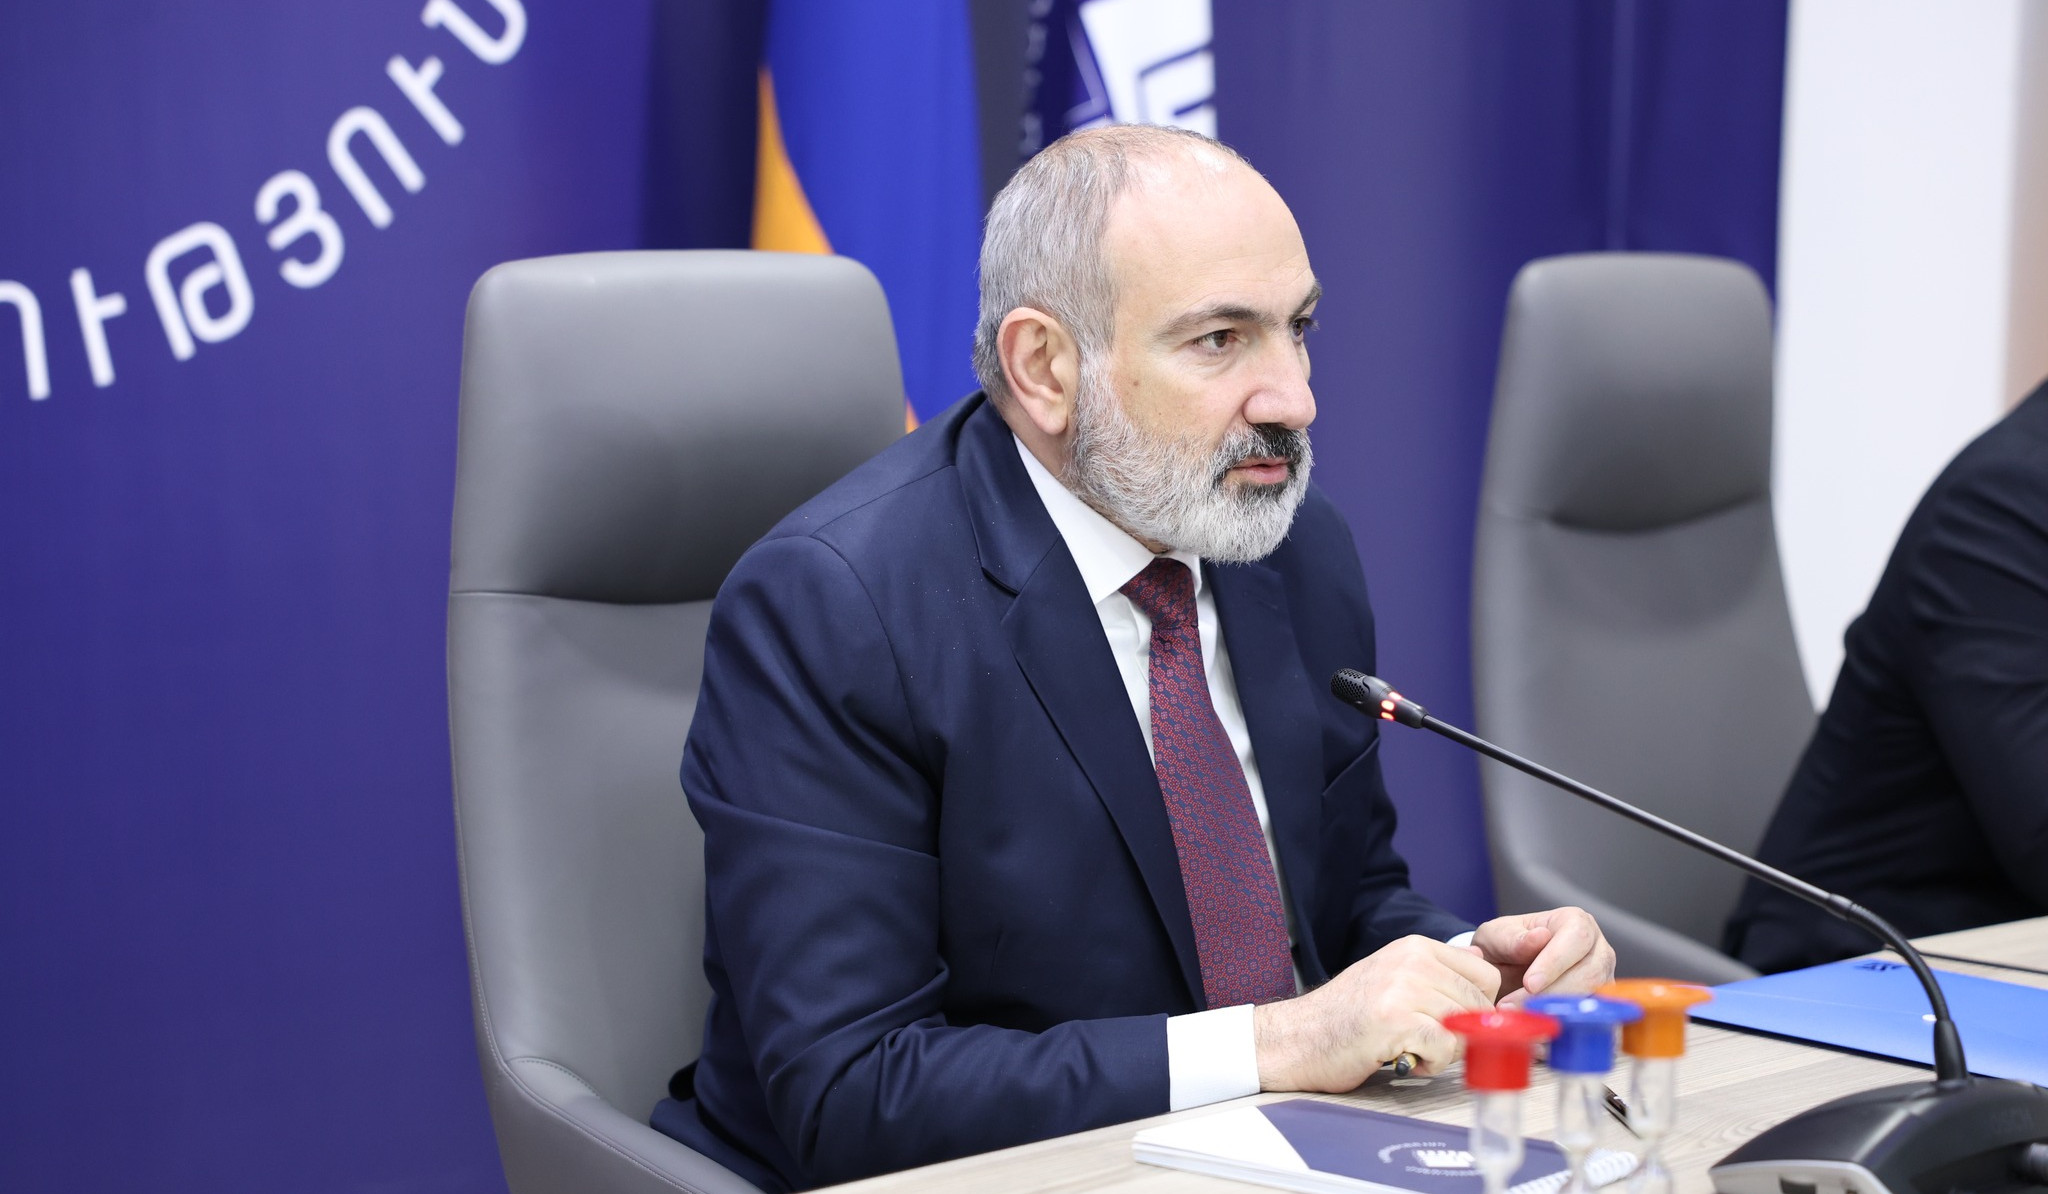 We have not done anything wrong in our relations with Russia: Nikol Pashinyan